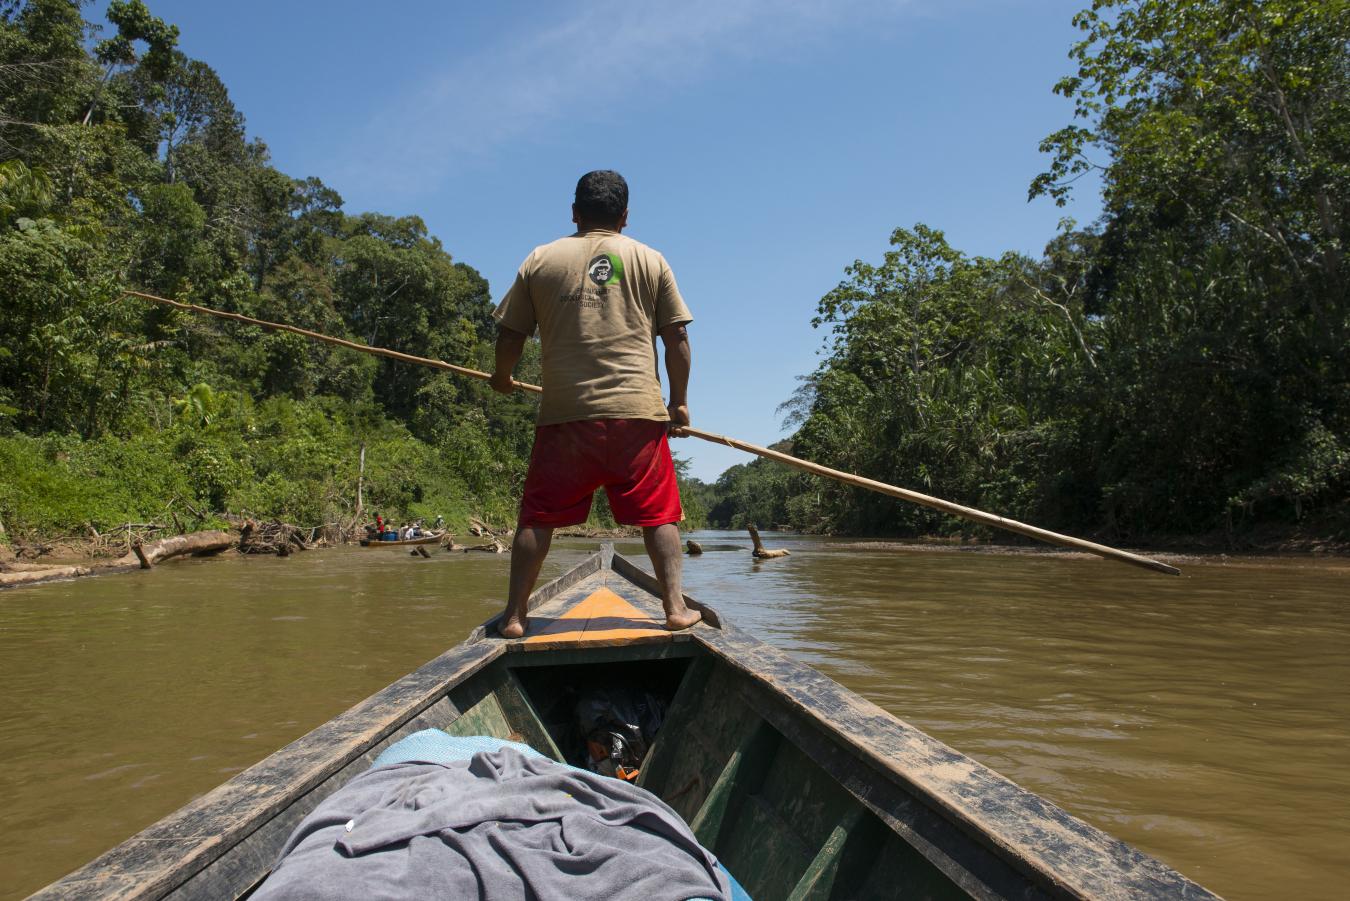 Eustauqio Cahuaniri standing in the front of the boat helping to navigate it through the difficult shallow waters of the river Yomibato with a long stick. Manu NP, Peru.